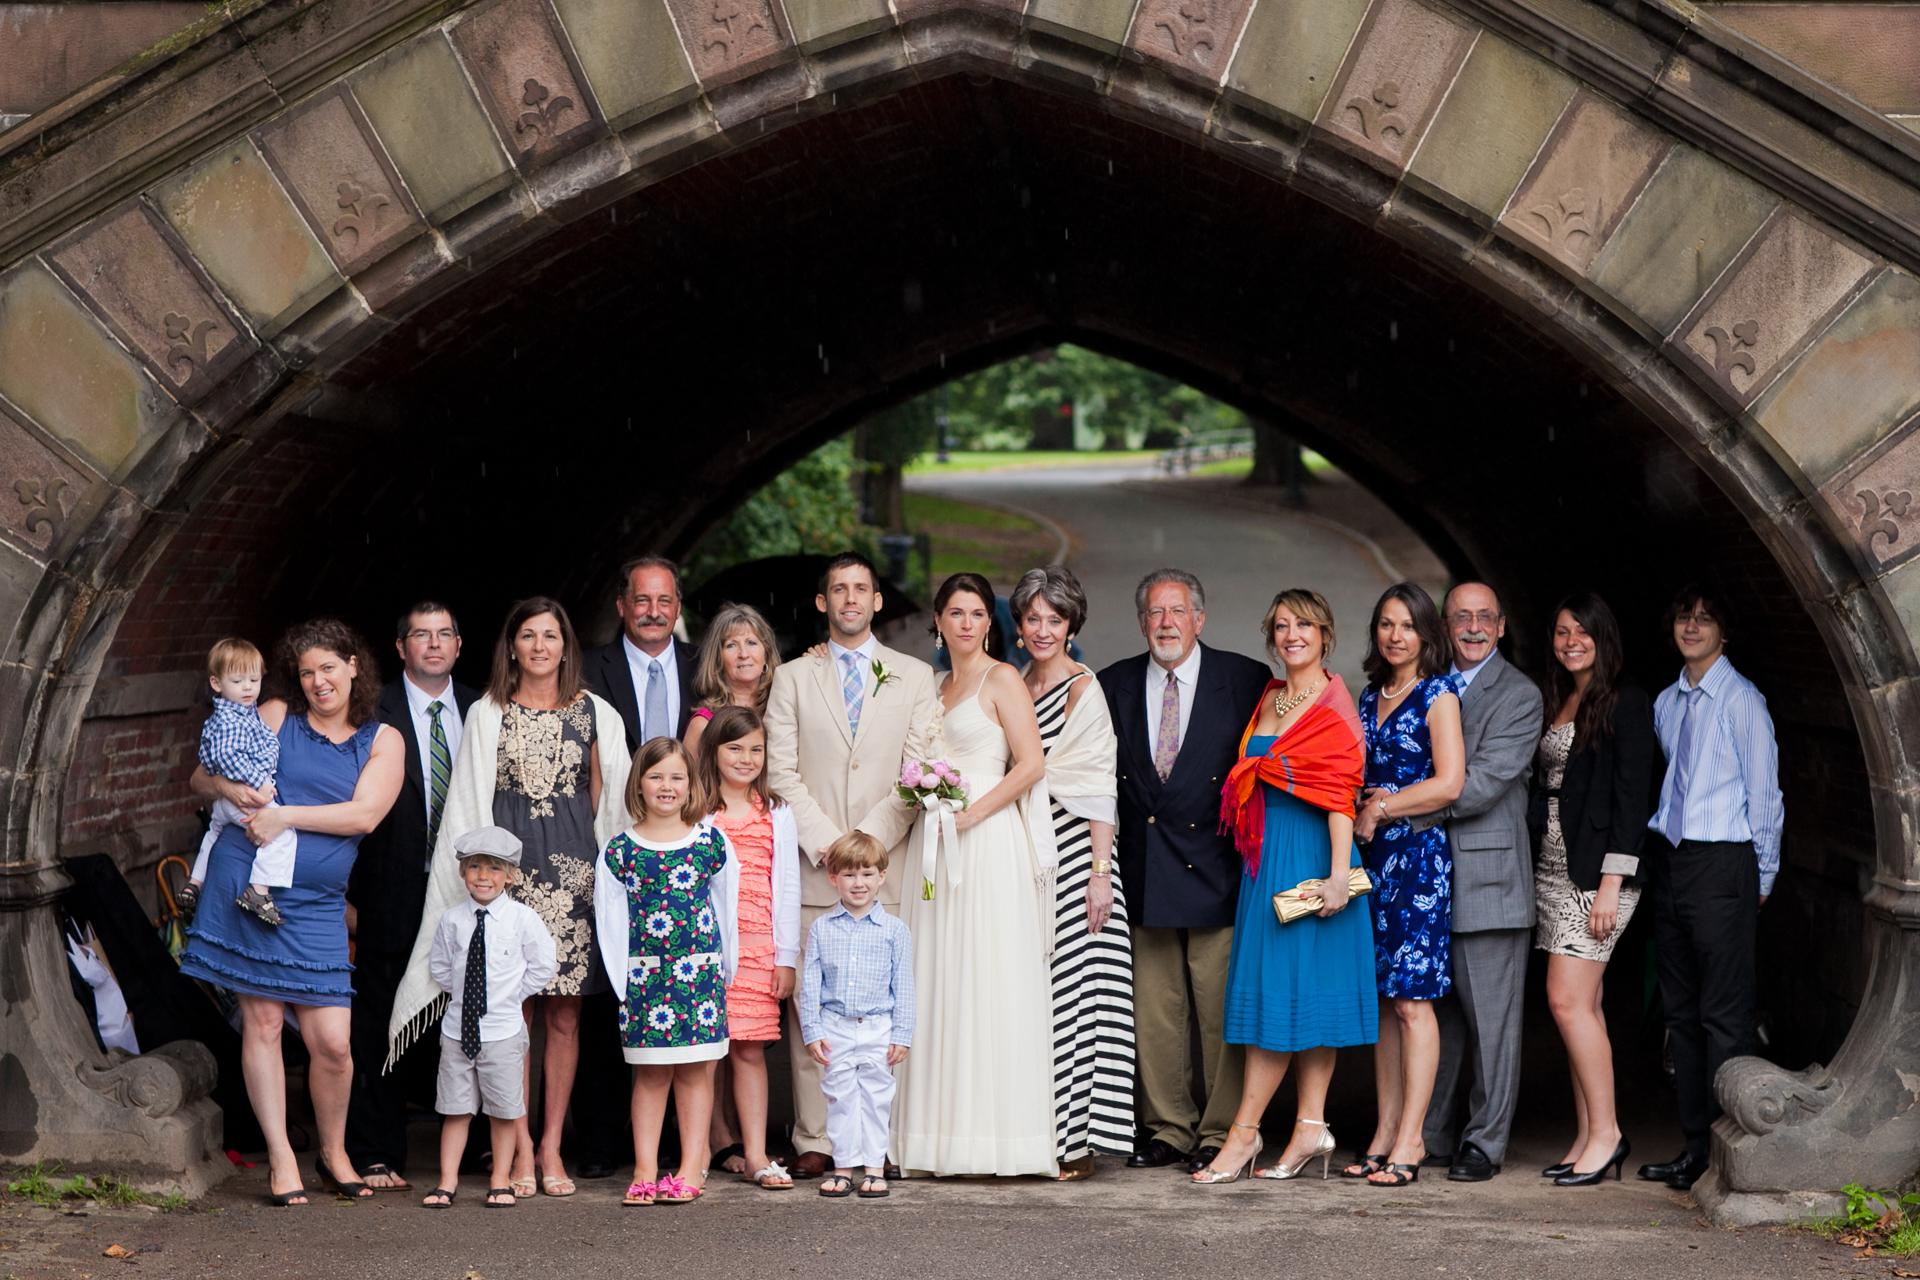  The bride and groom's families in Central Park, NYC 